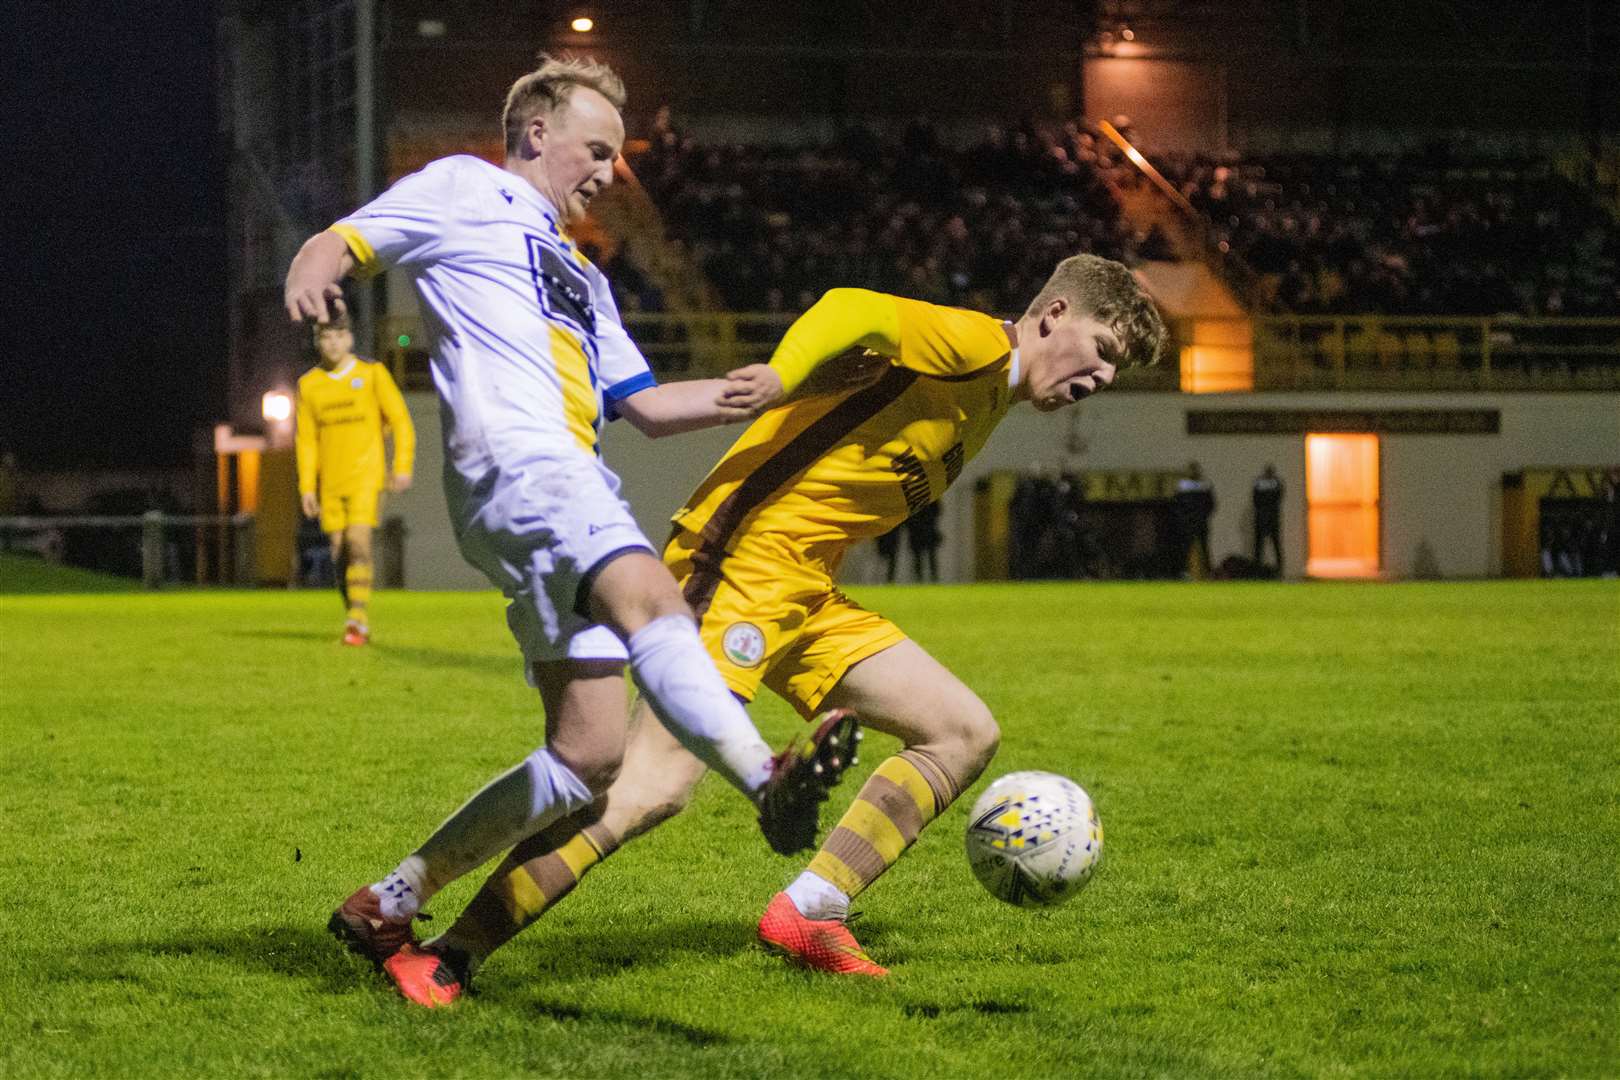 Locos Jamie Michie tries to get a tackle in on Forres Mechanics' Ethan Cairns. ..Forres Mechanics FC (1) vs Inverurie Loco Works FC (1) - Highland Football League 22/23 - Mosset Park, Forres 10/12/2022...Picture: Daniel Forsyth..